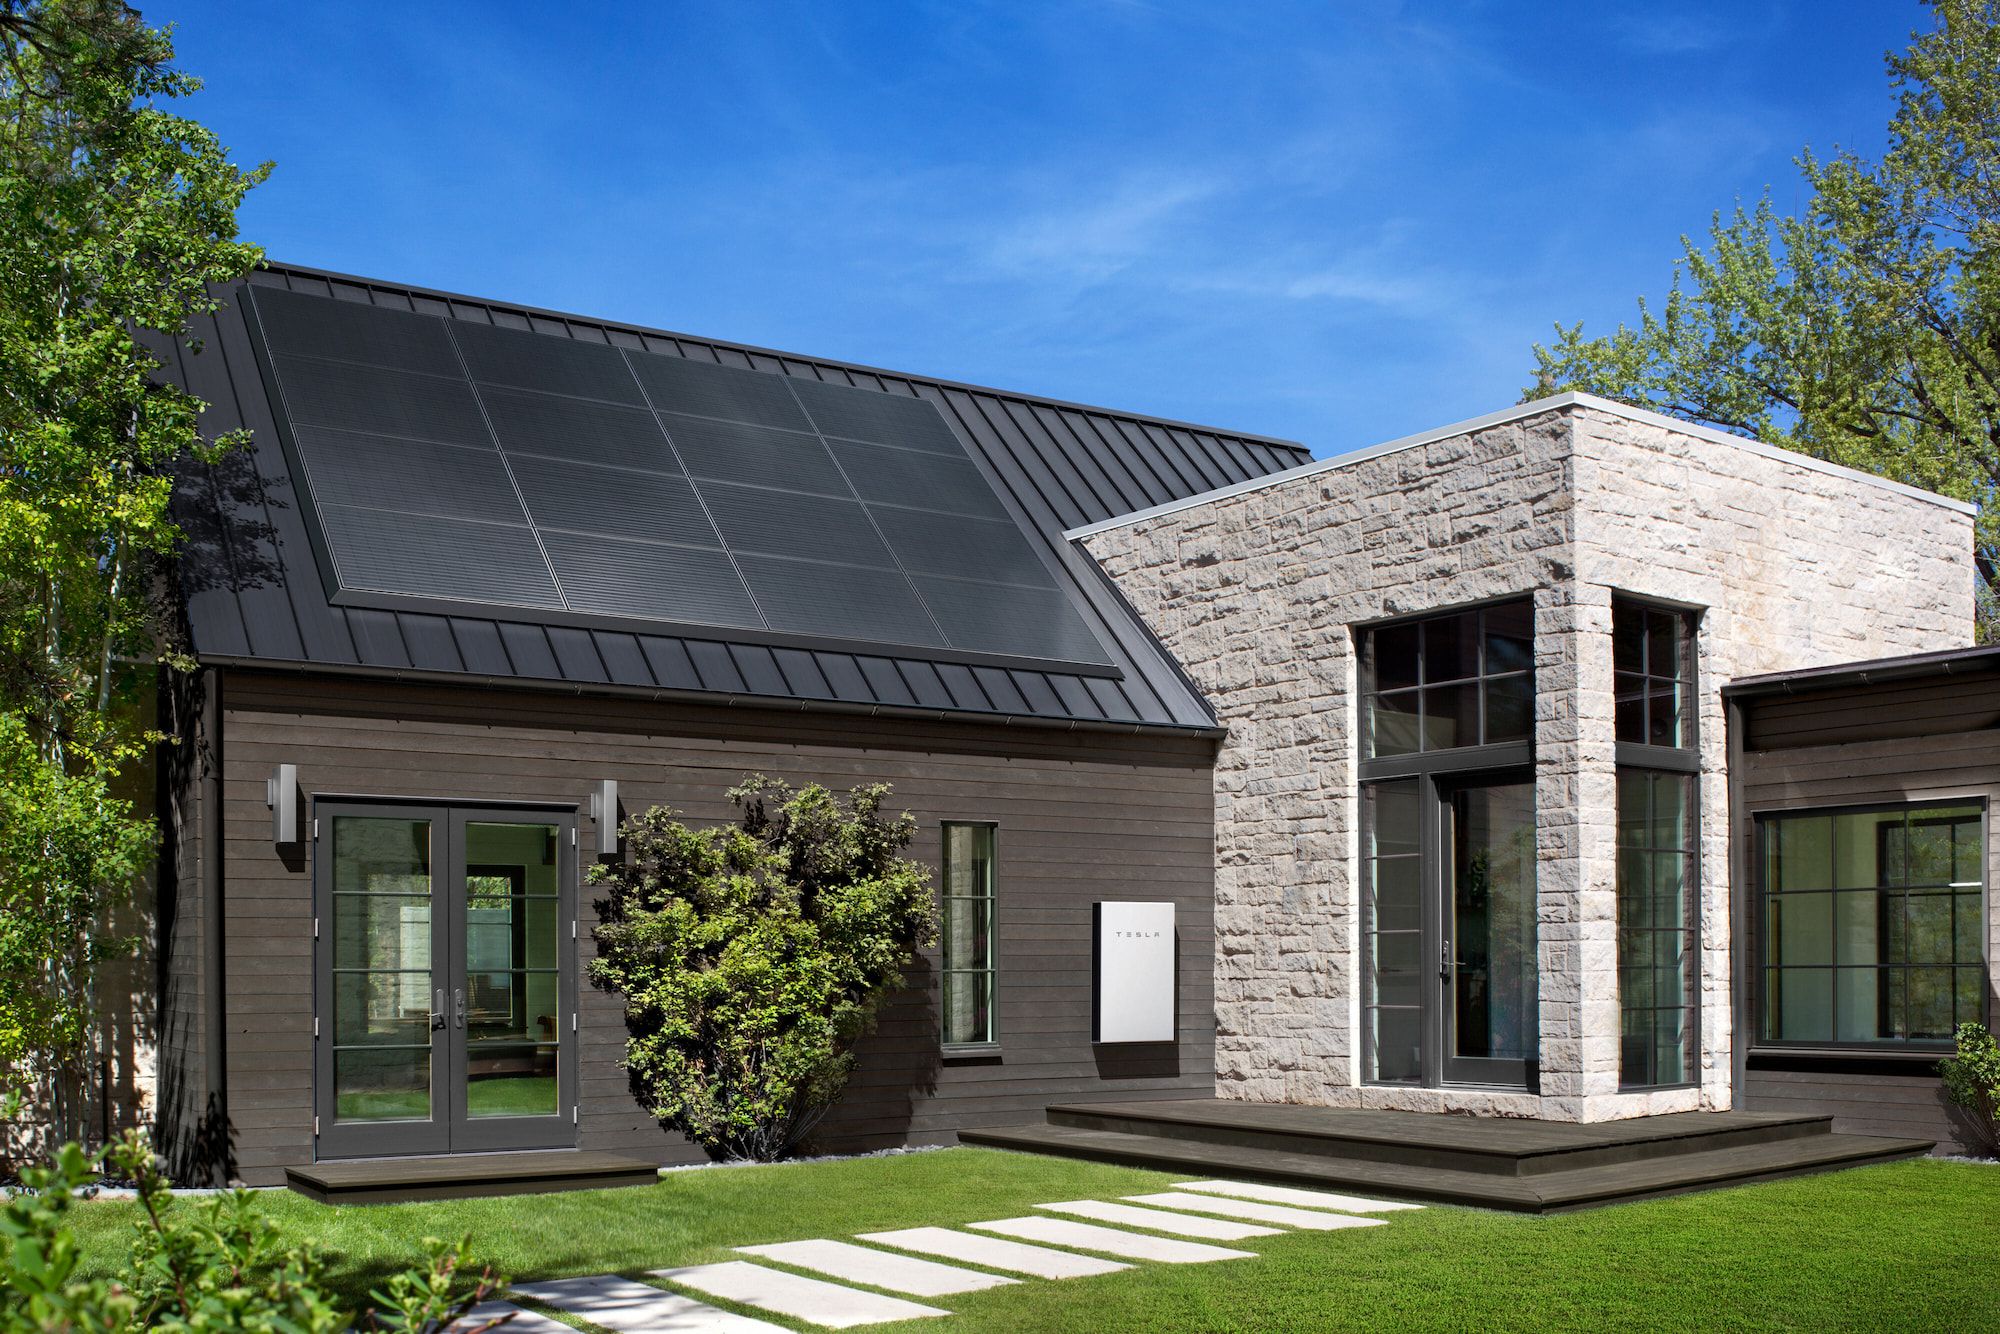 Modern house with solar panels on slanted roof